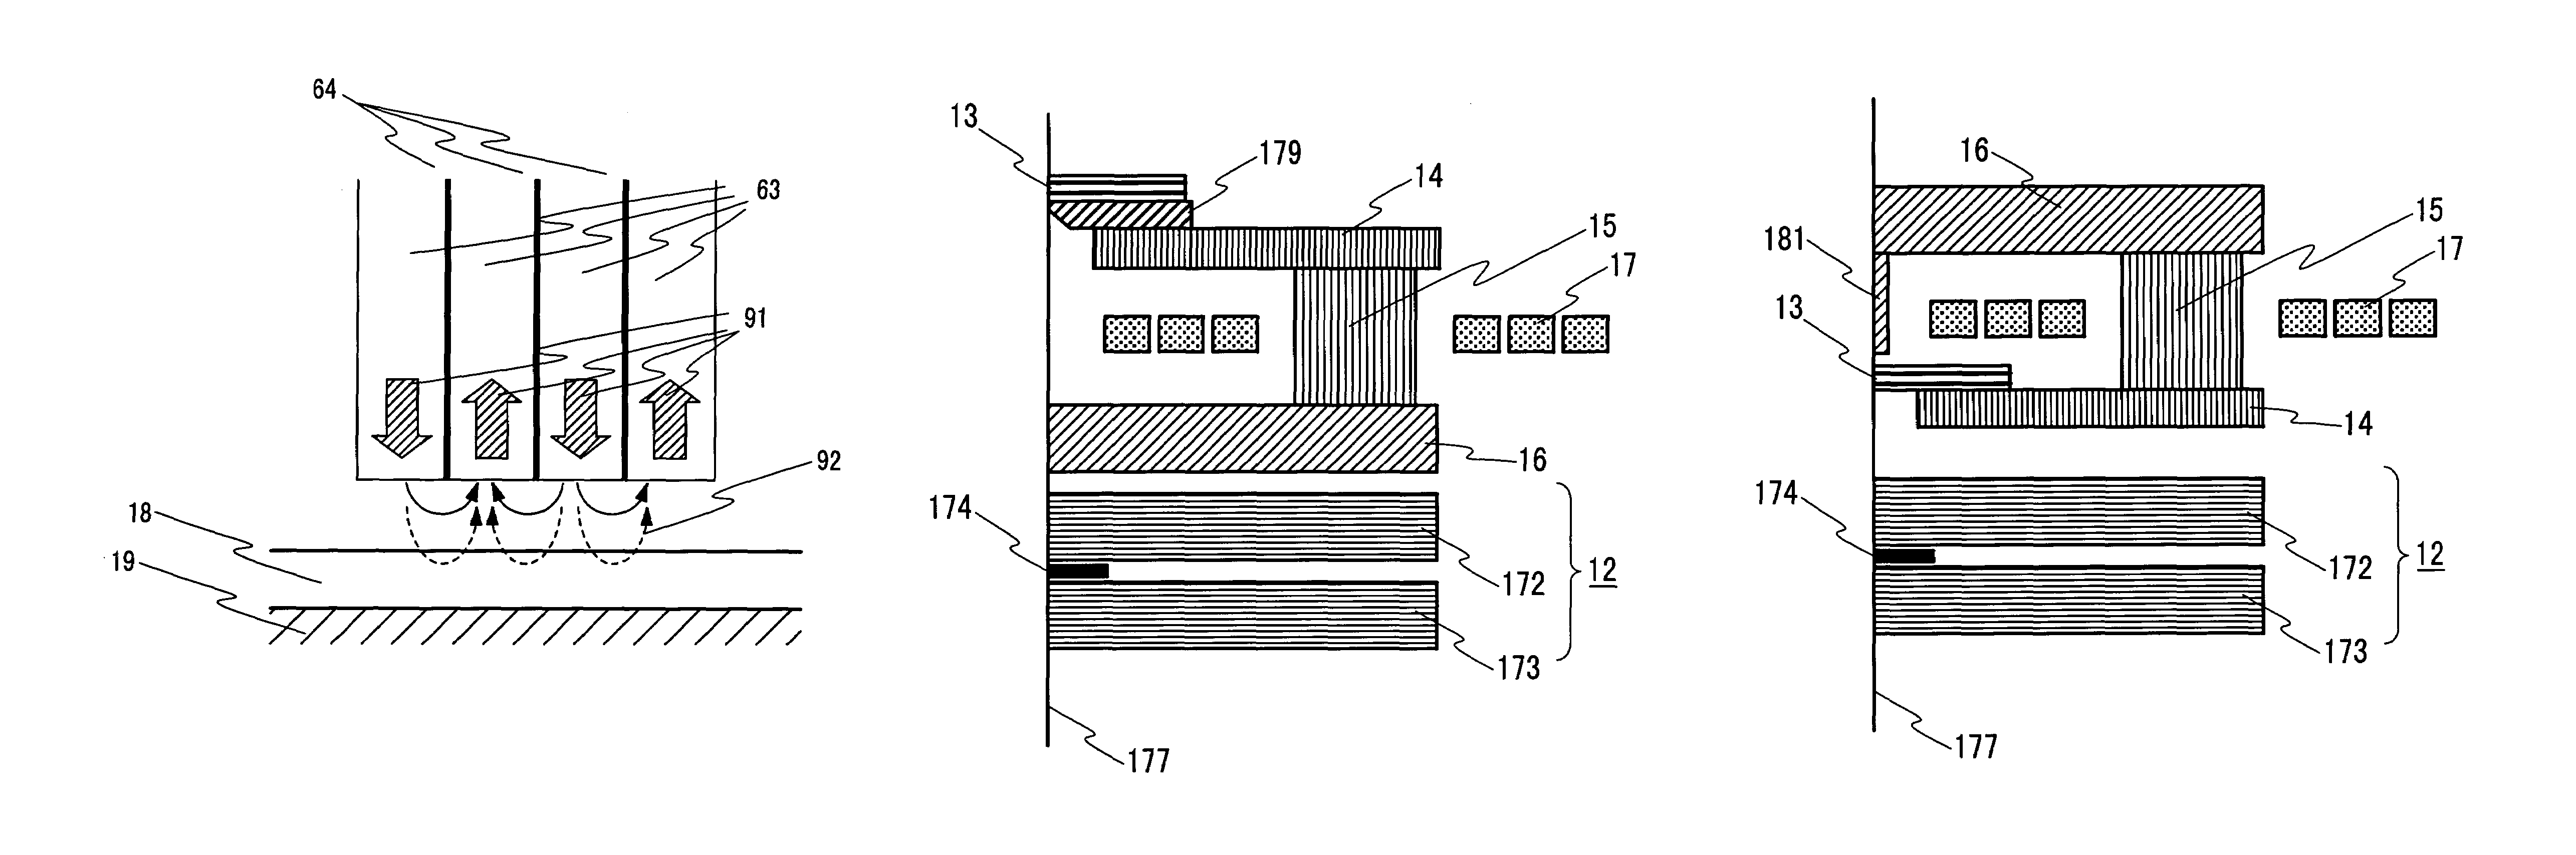 Thin film perpendicular magnetic recording head, their fabrication process and magnetic disk drive using it